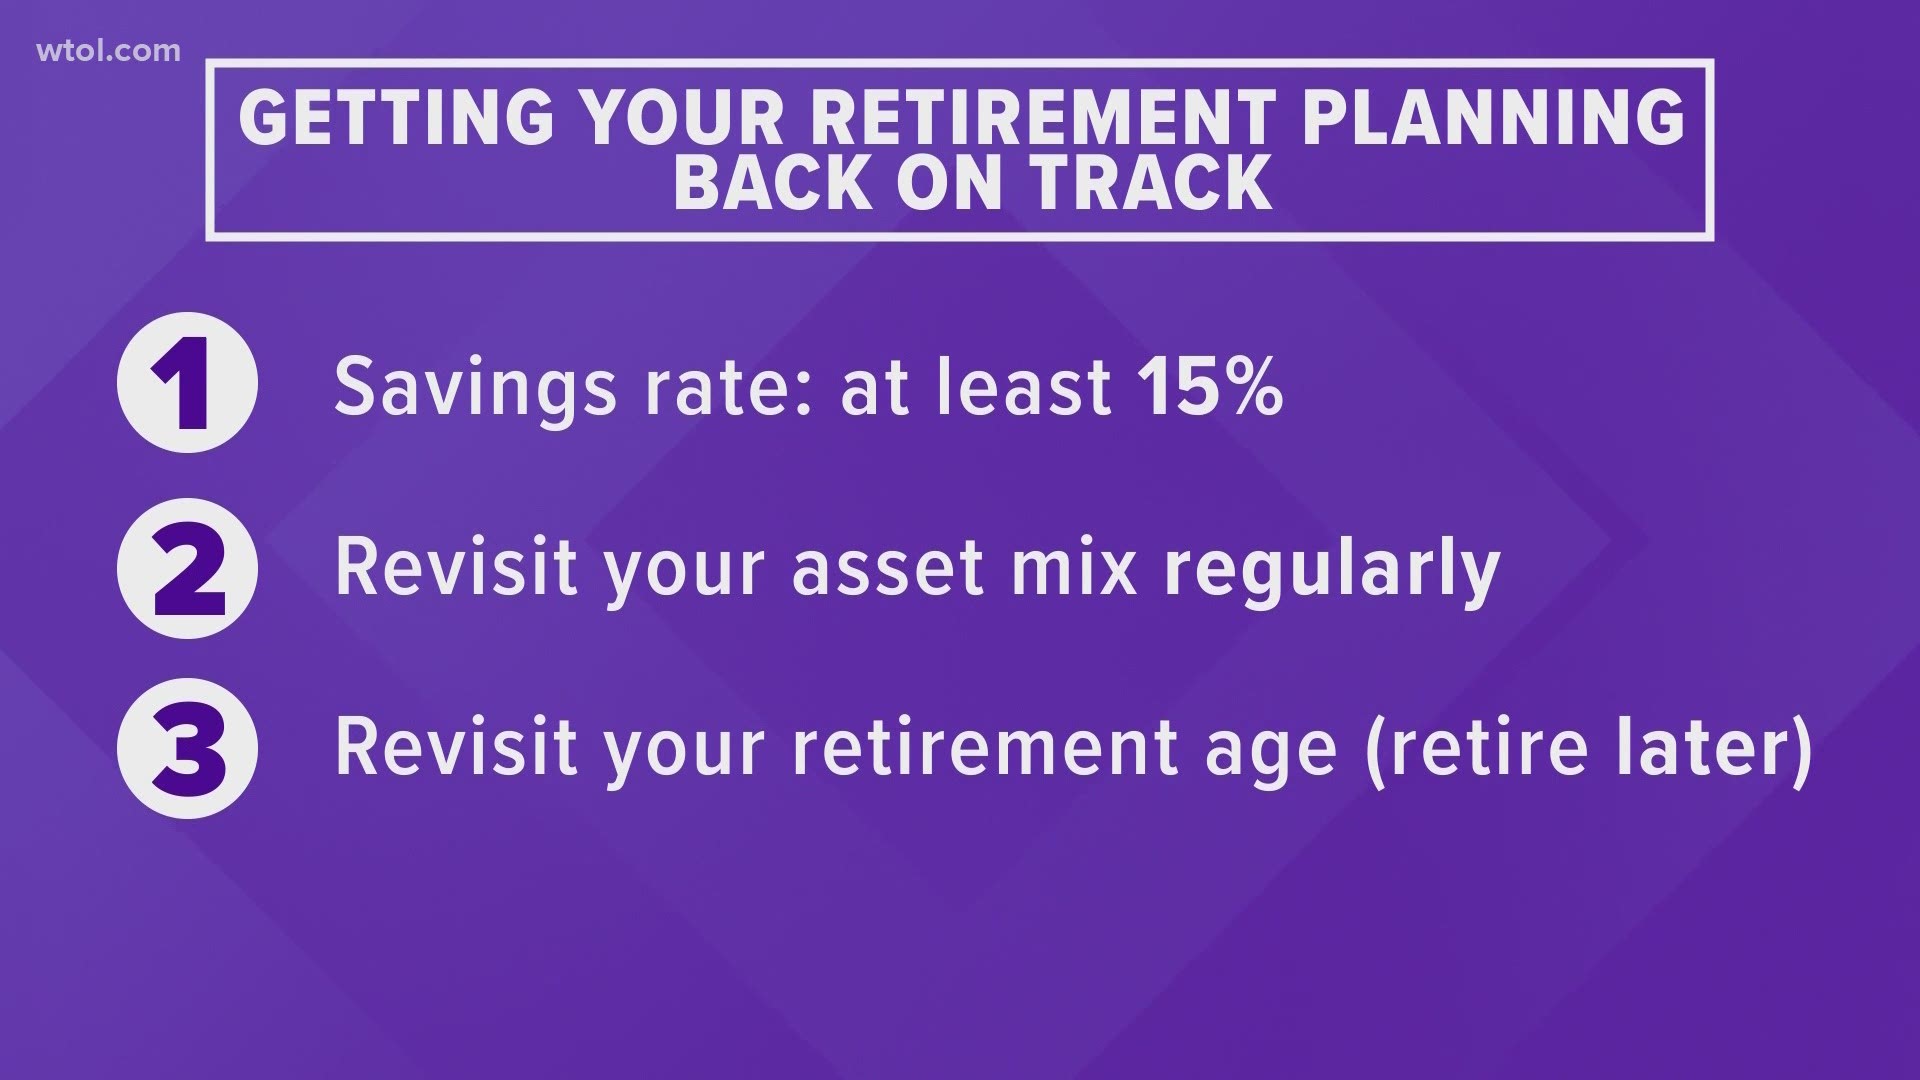 More than 8 in 10 of Americans say the events of the past year have impacted their retirement plans.